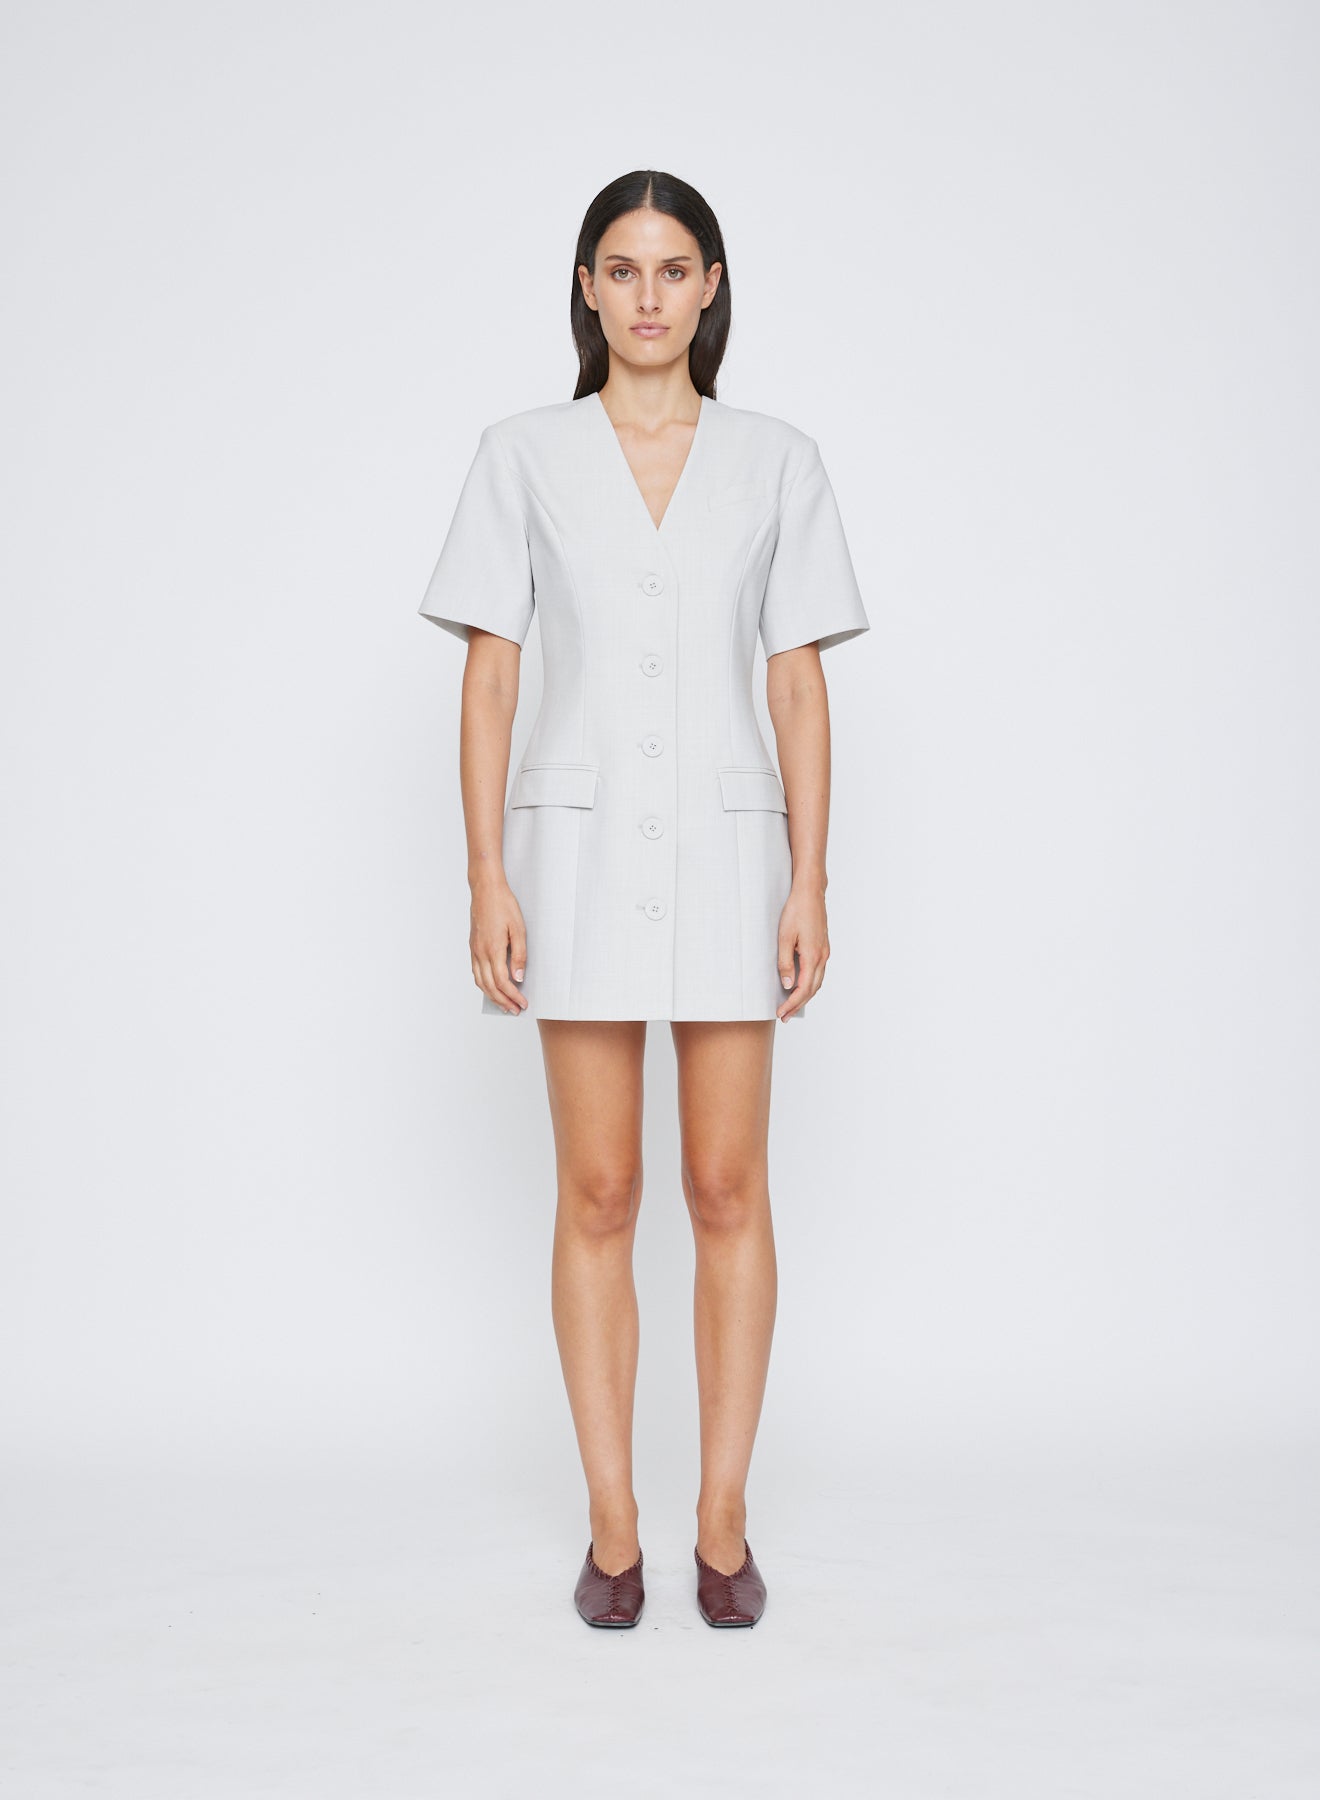 The ANNA QUAN Romy Dress features feminine seam work that shapes the waist line, a v cut neckline and flap pockets. Finishing touches include a button down front and A-line hem. Fully lined for ease of wear and crafted in heather wool suiting.